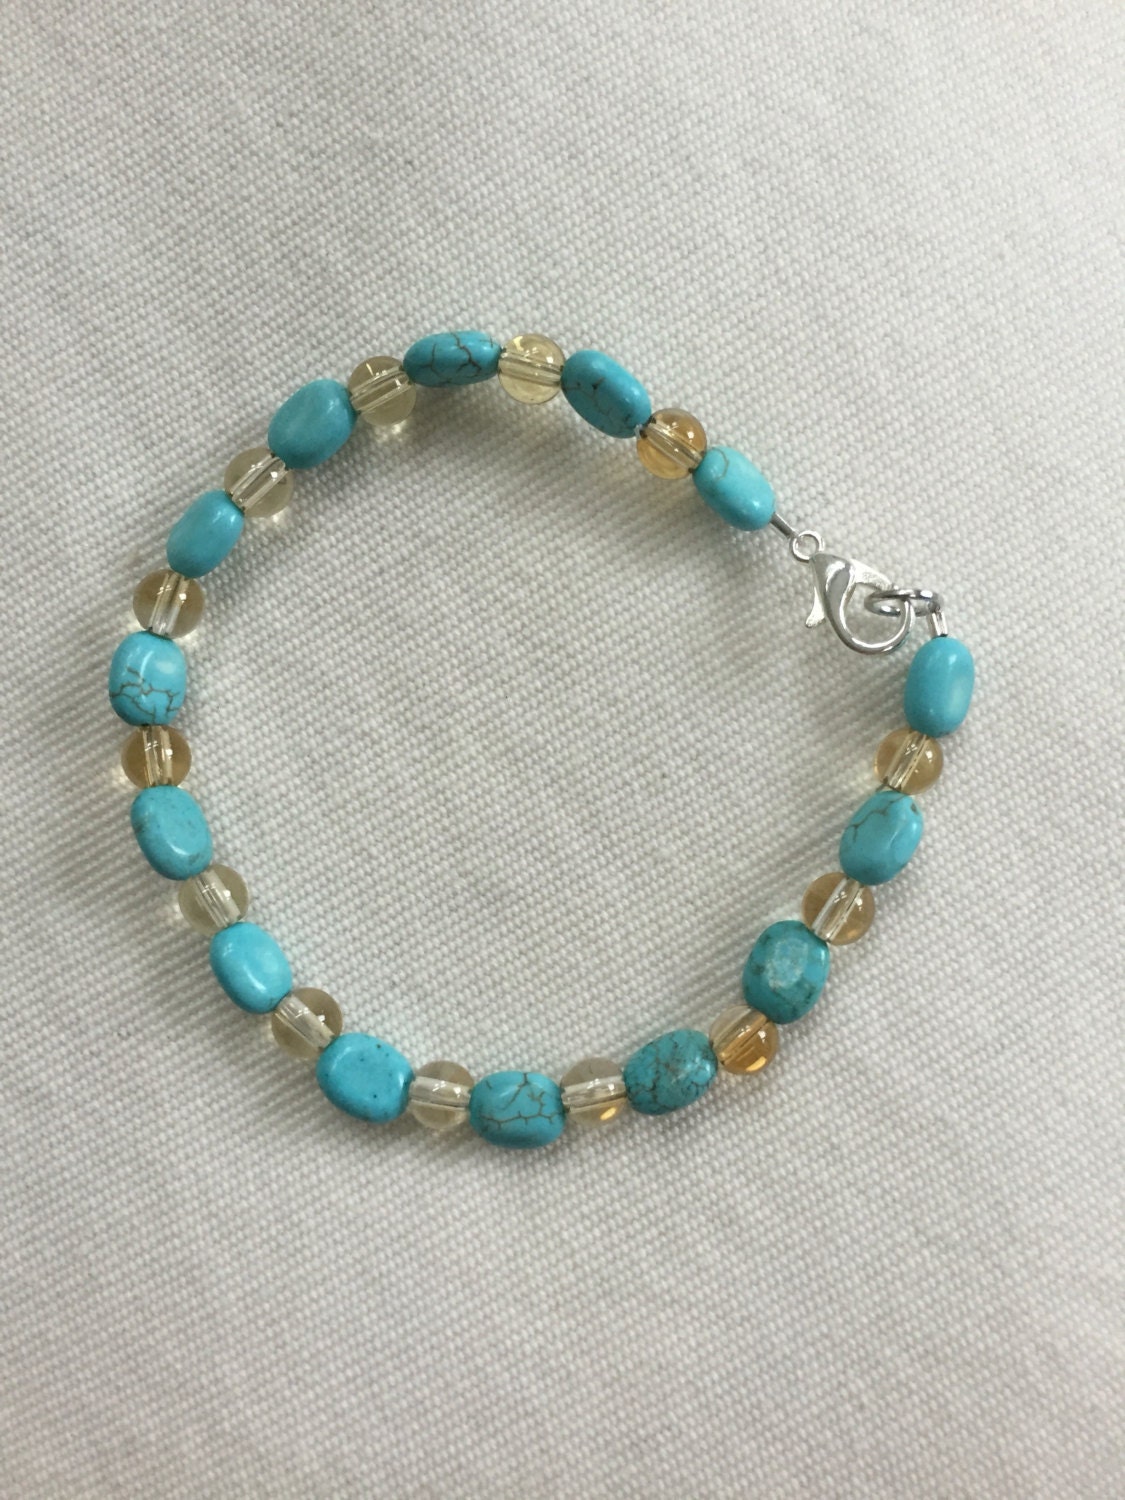 Handmade Delicate Turquoise and Gold Bracelet